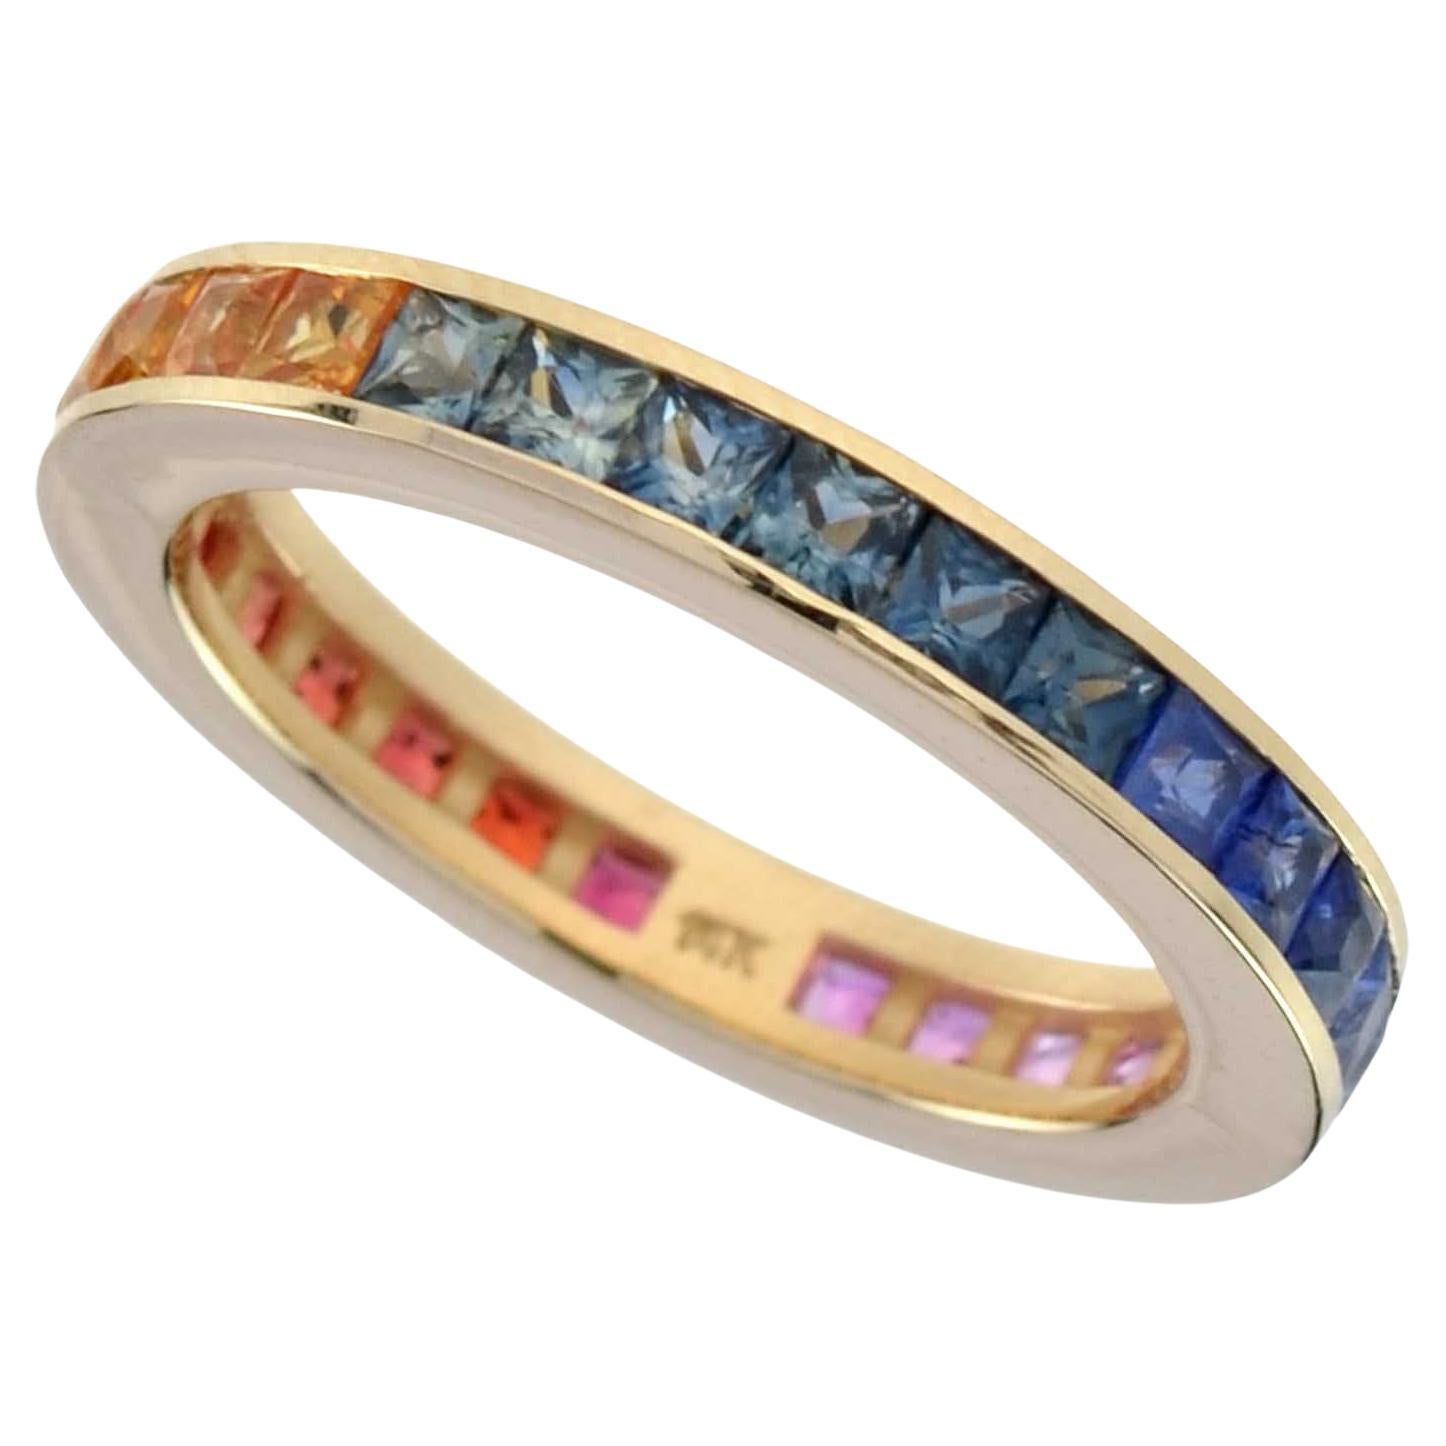 For Sale:  Square Cut Rainbow Sapphire Eternity Band in Yellow Gold 14K